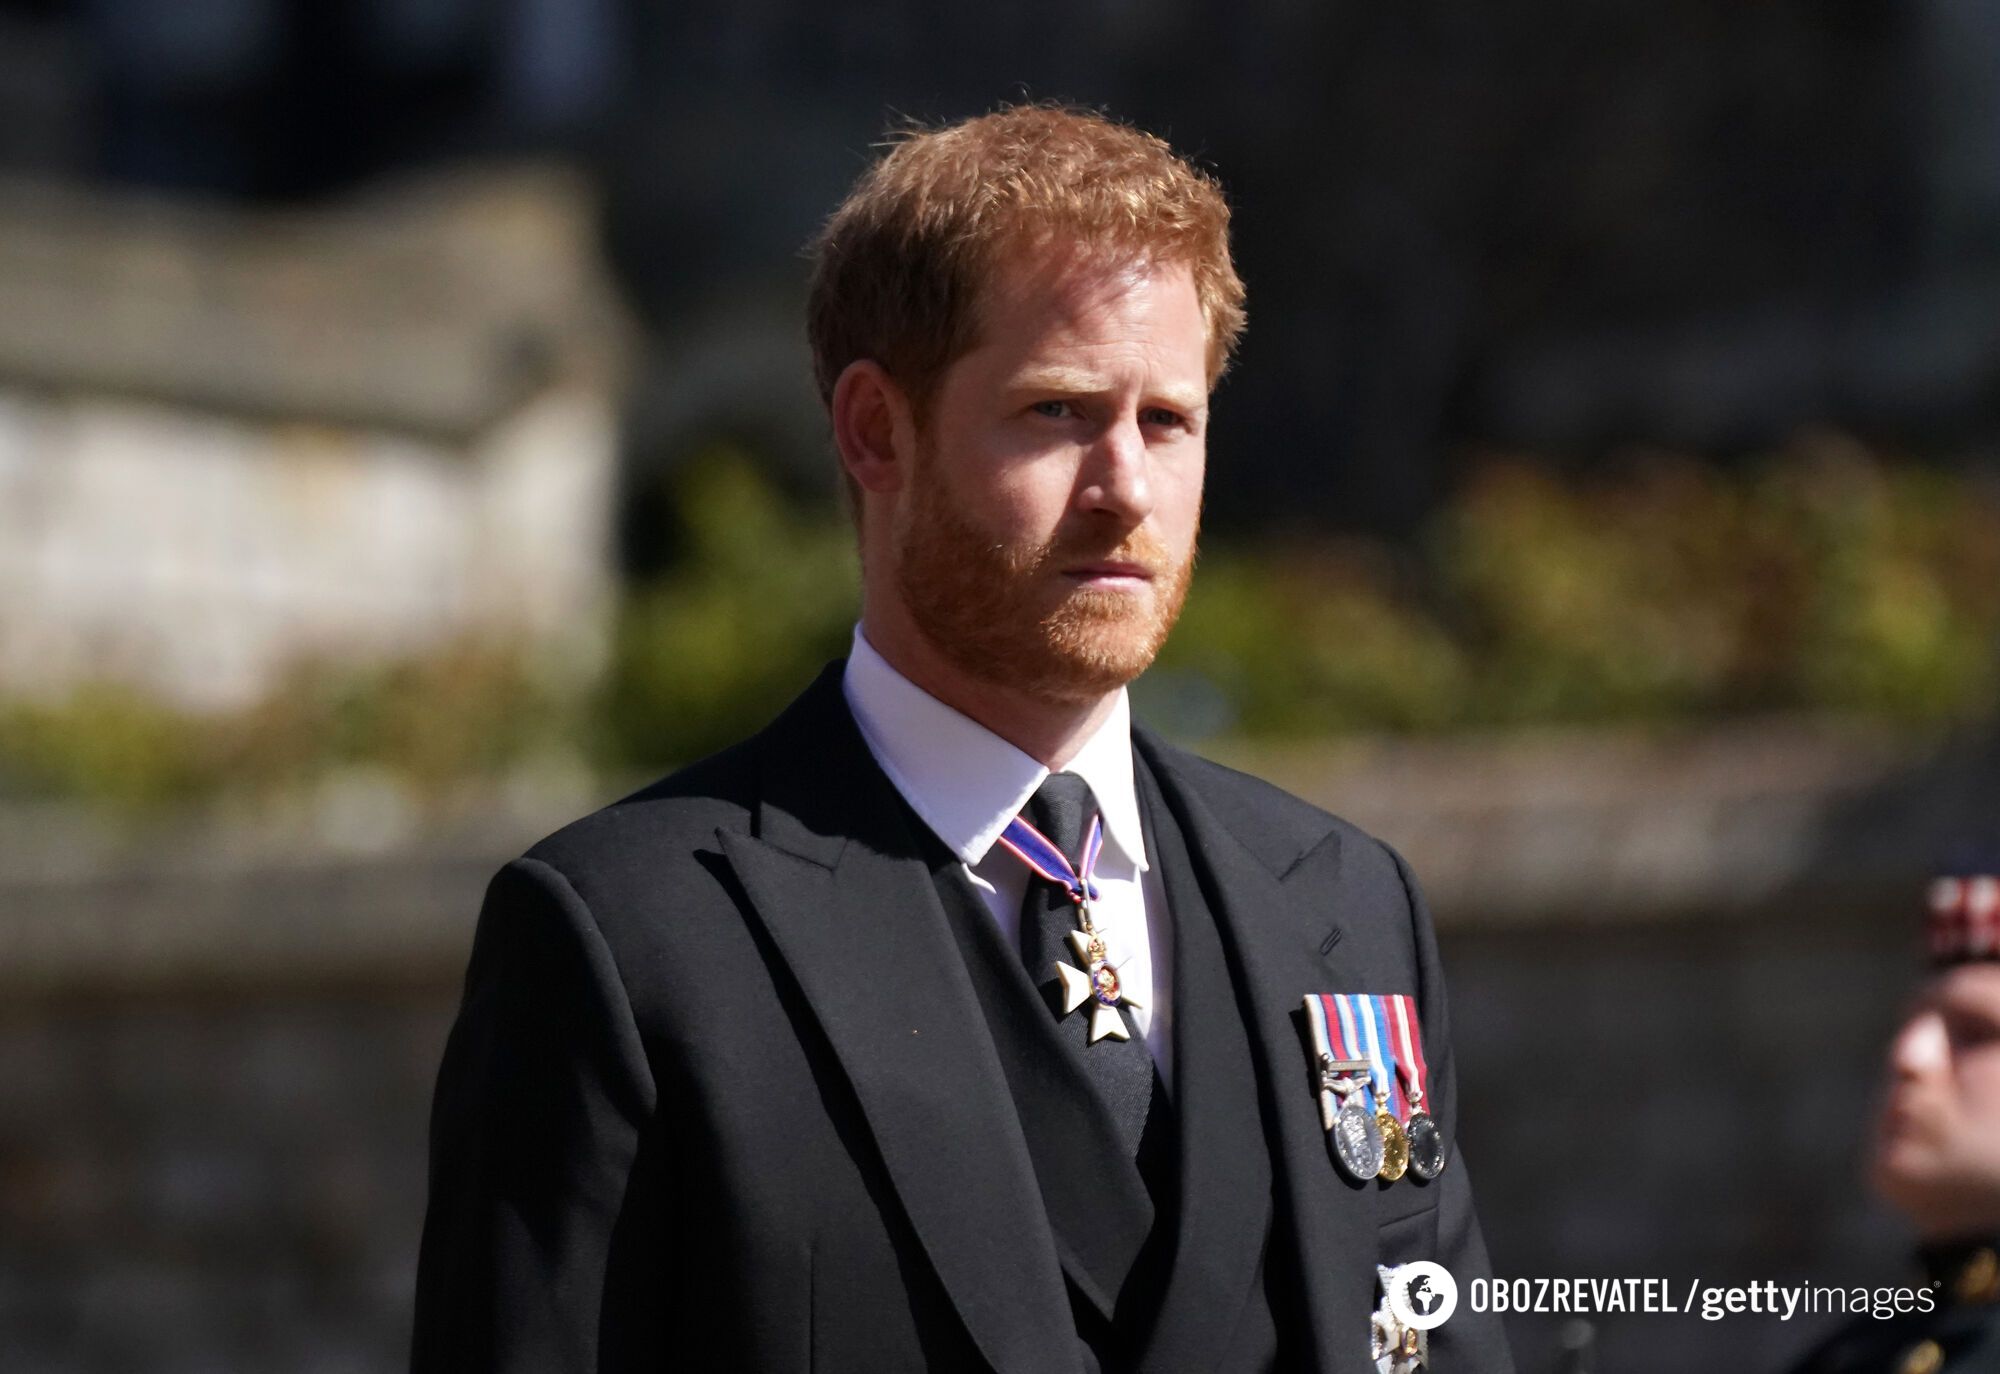 Prince Harry may face another problem: former stripper threatens to publish his spicy photos on OnlyFans